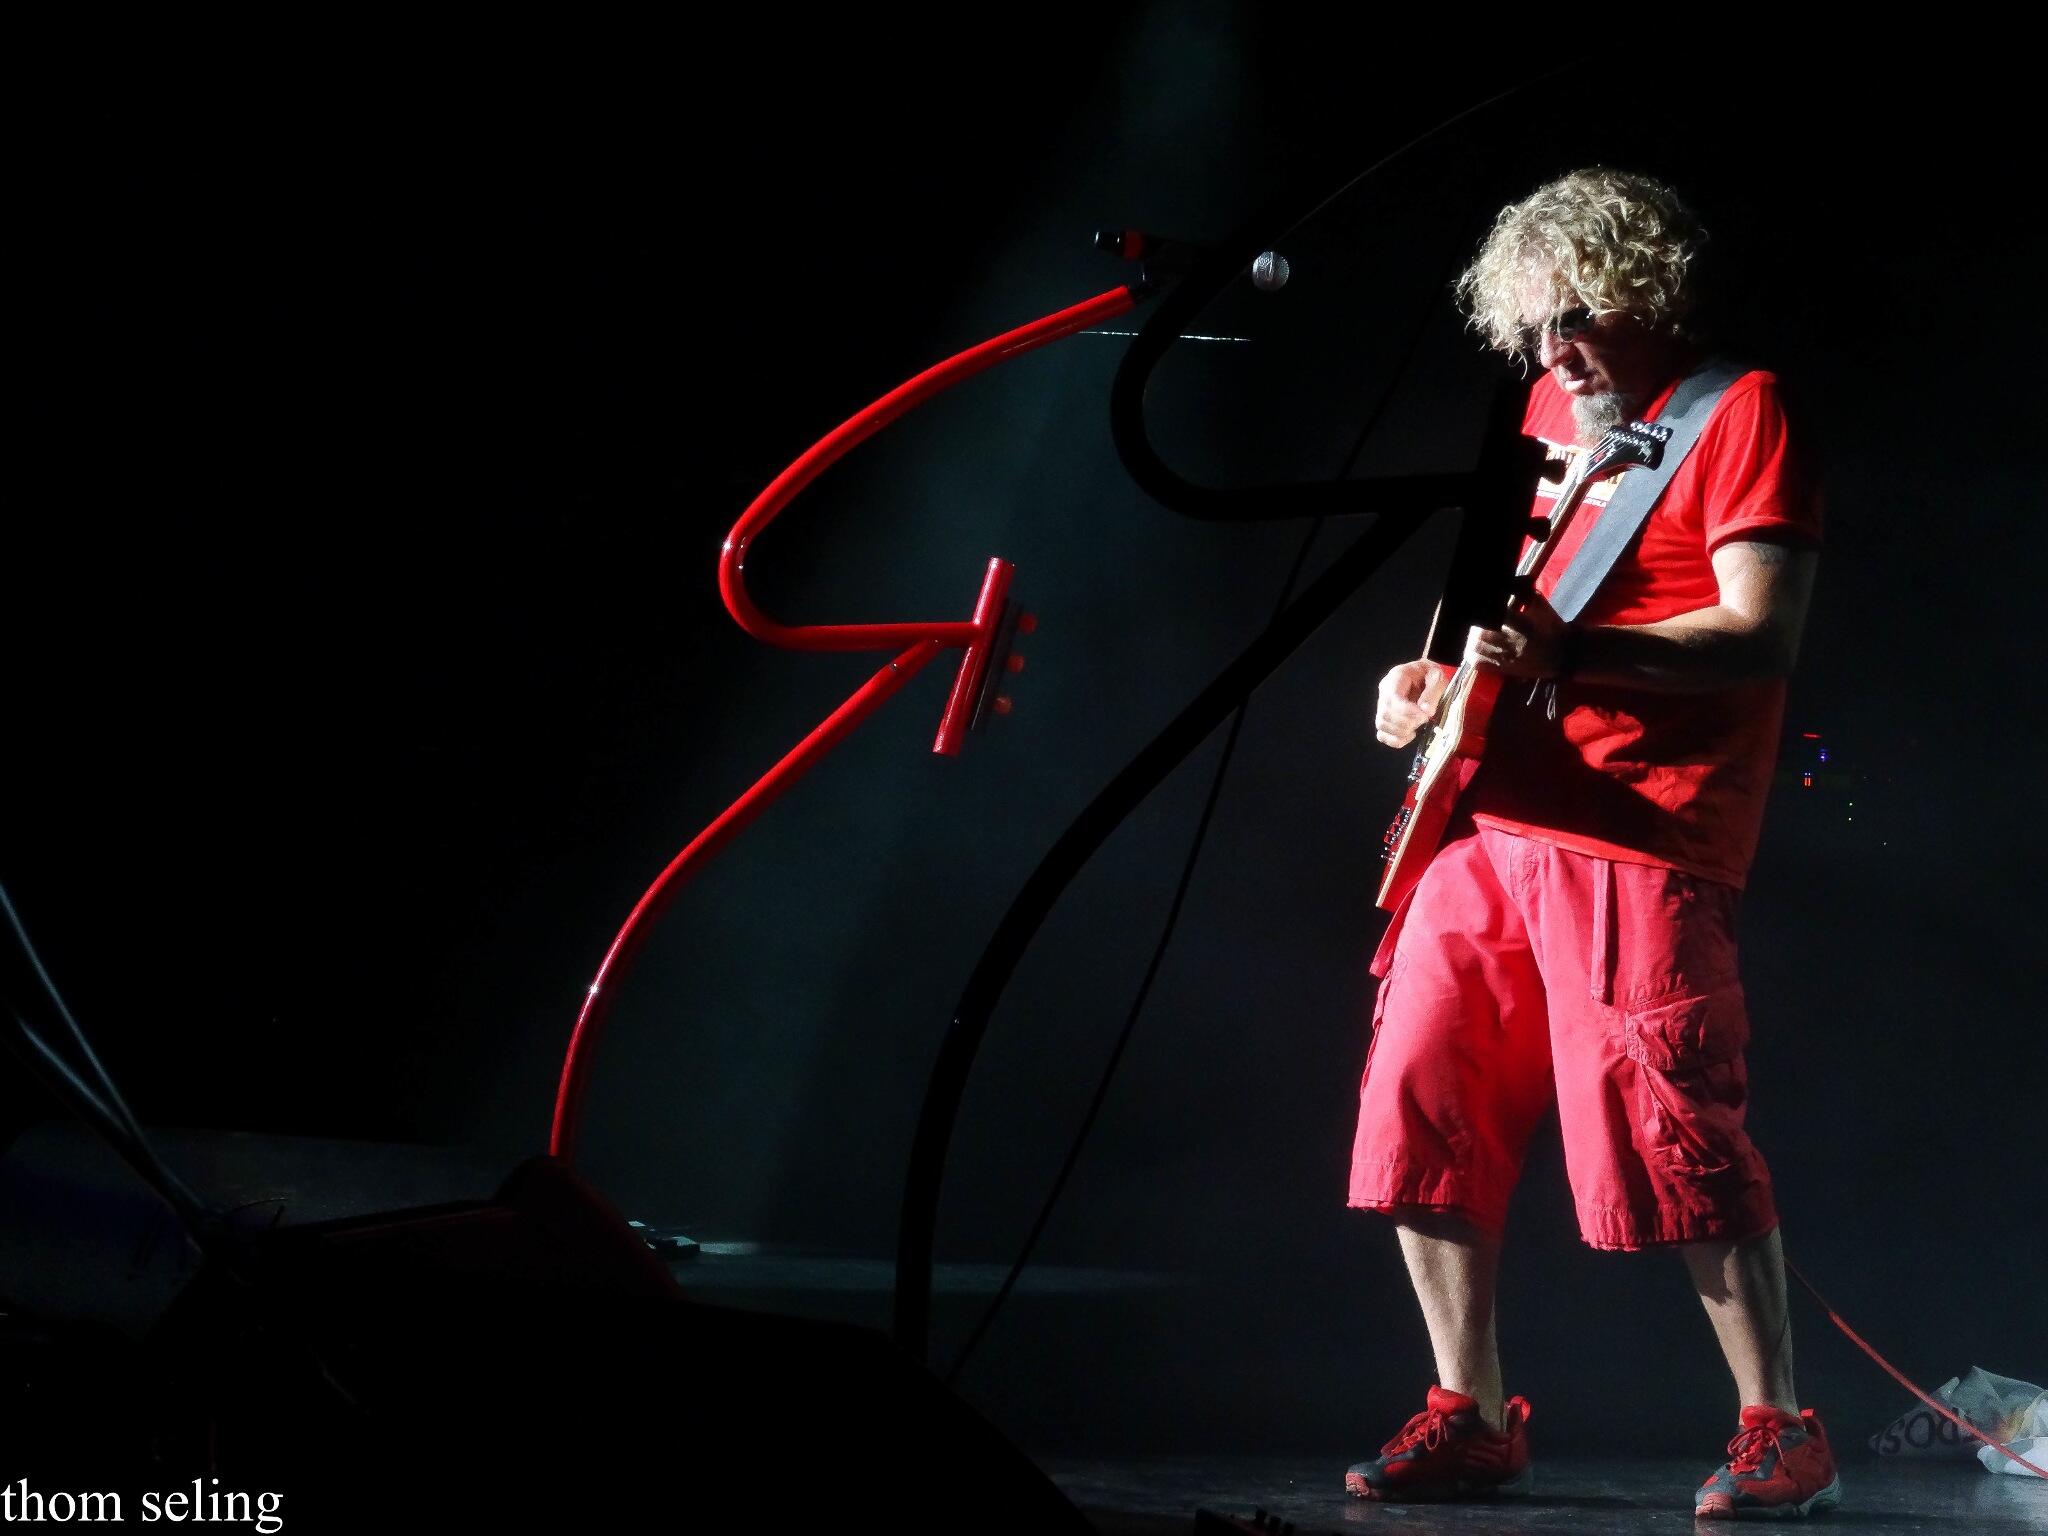 Sammy Hagar at last week's DoRock show in Detroit! Were you there with him?! Photo